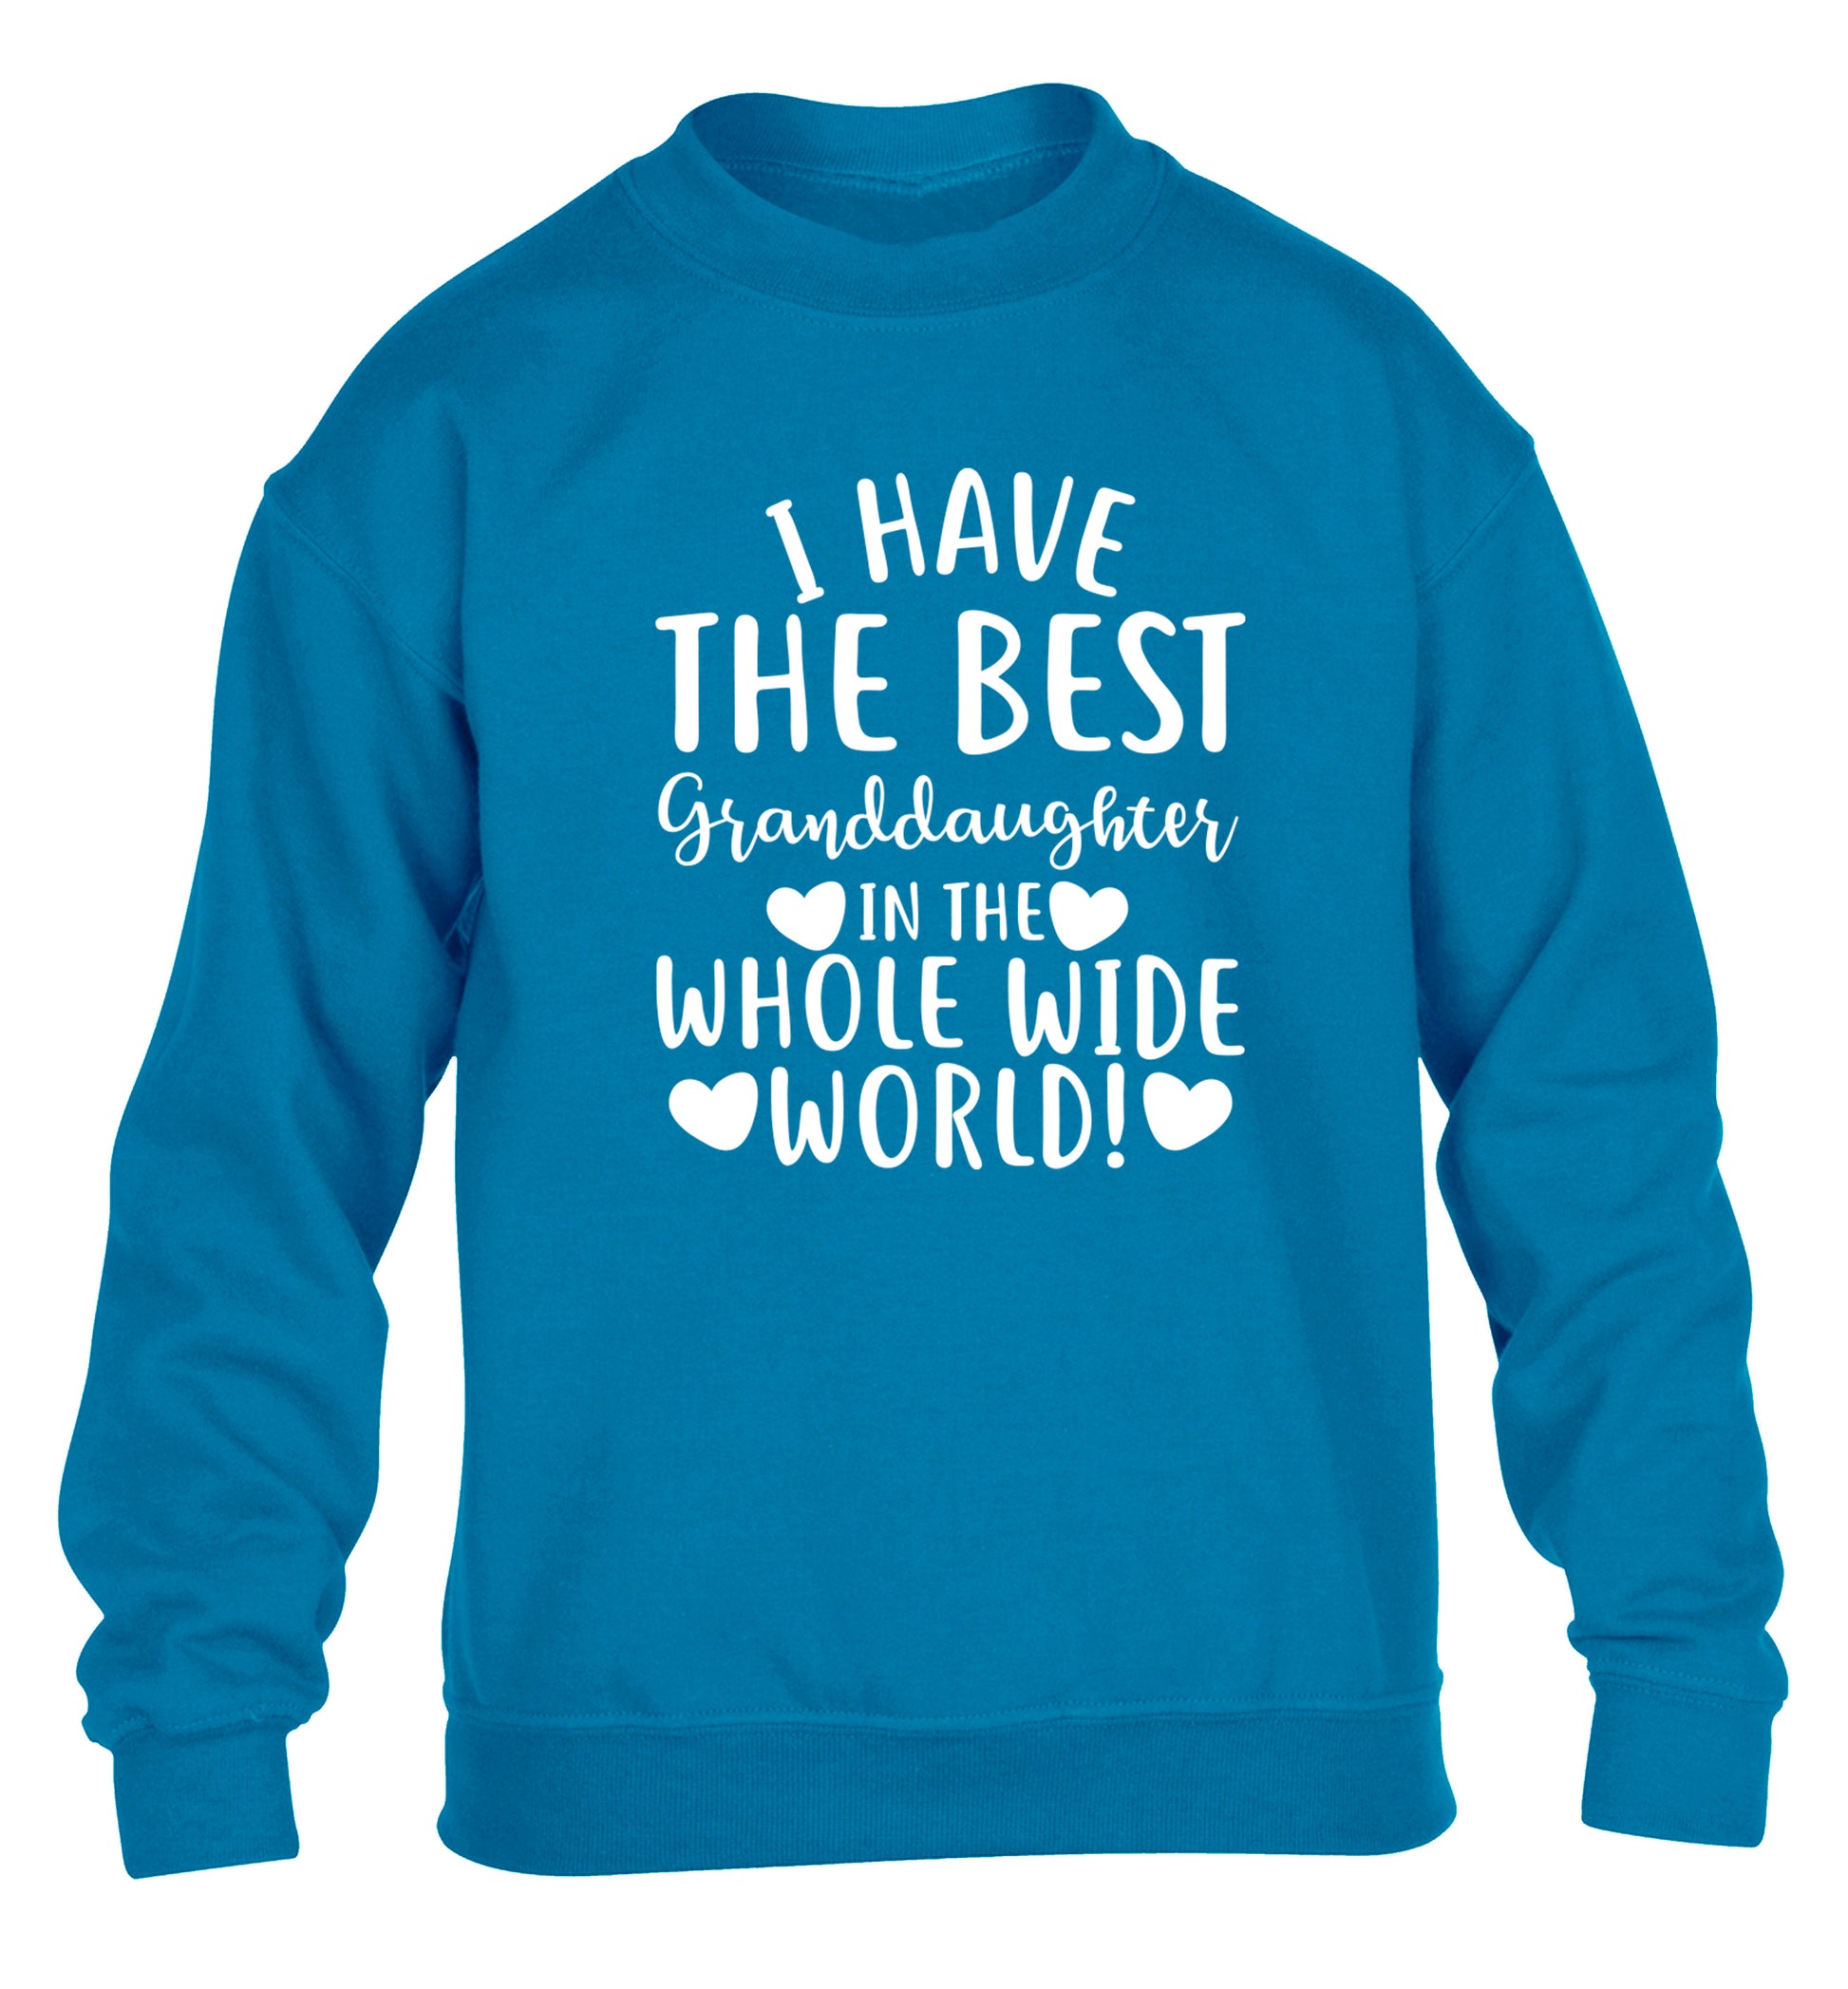 I have the best granddaughter in the whole wide world! children's blue sweater 12-13 Years